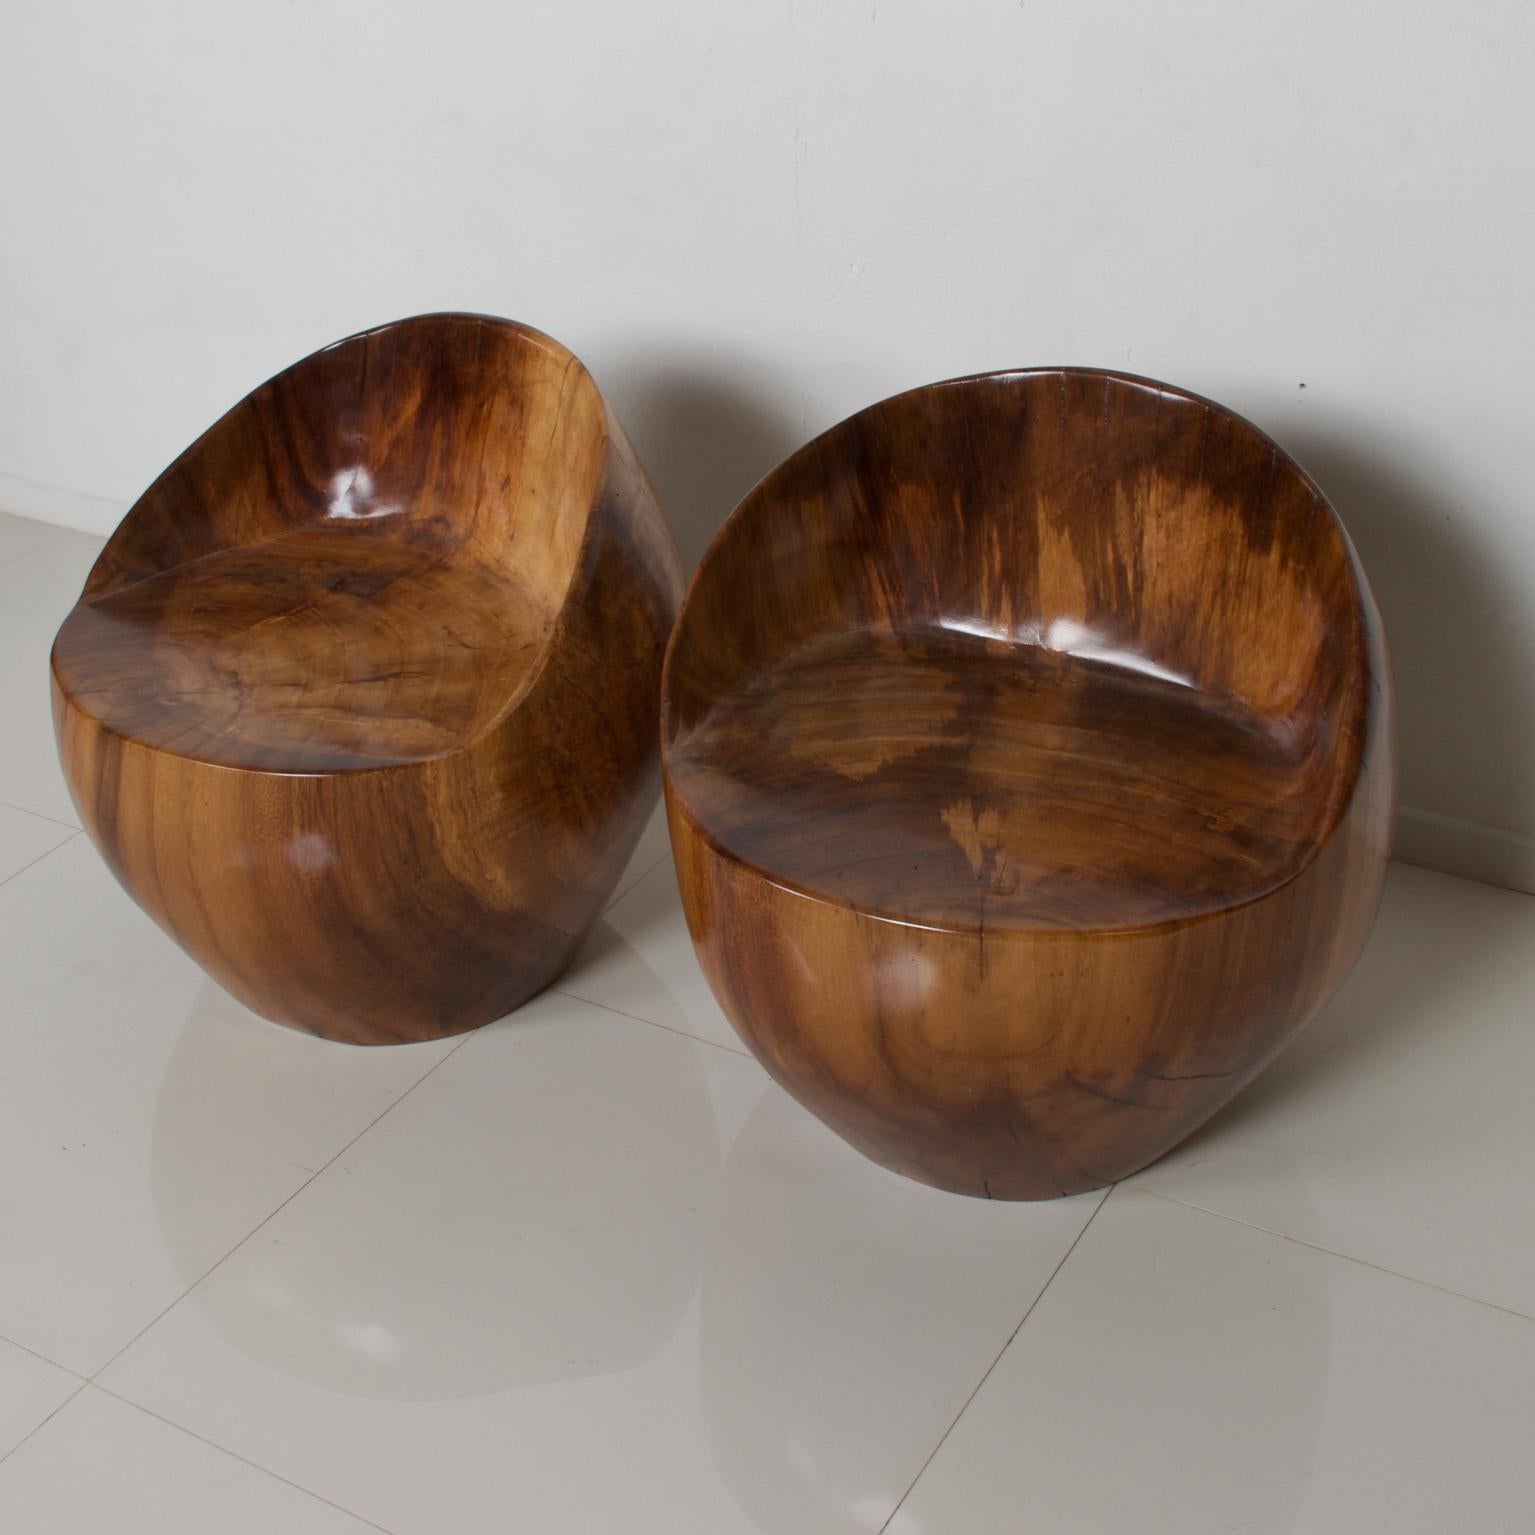 For your consideration: Pair of custom PAROTA chairs, tropical Latin American Exotic wood done in a modern Barrel tub design reminiscent of Don S Shoemaker. Set of two chairs.
Parota is a highly prized sustainable wood with a bold striking wood